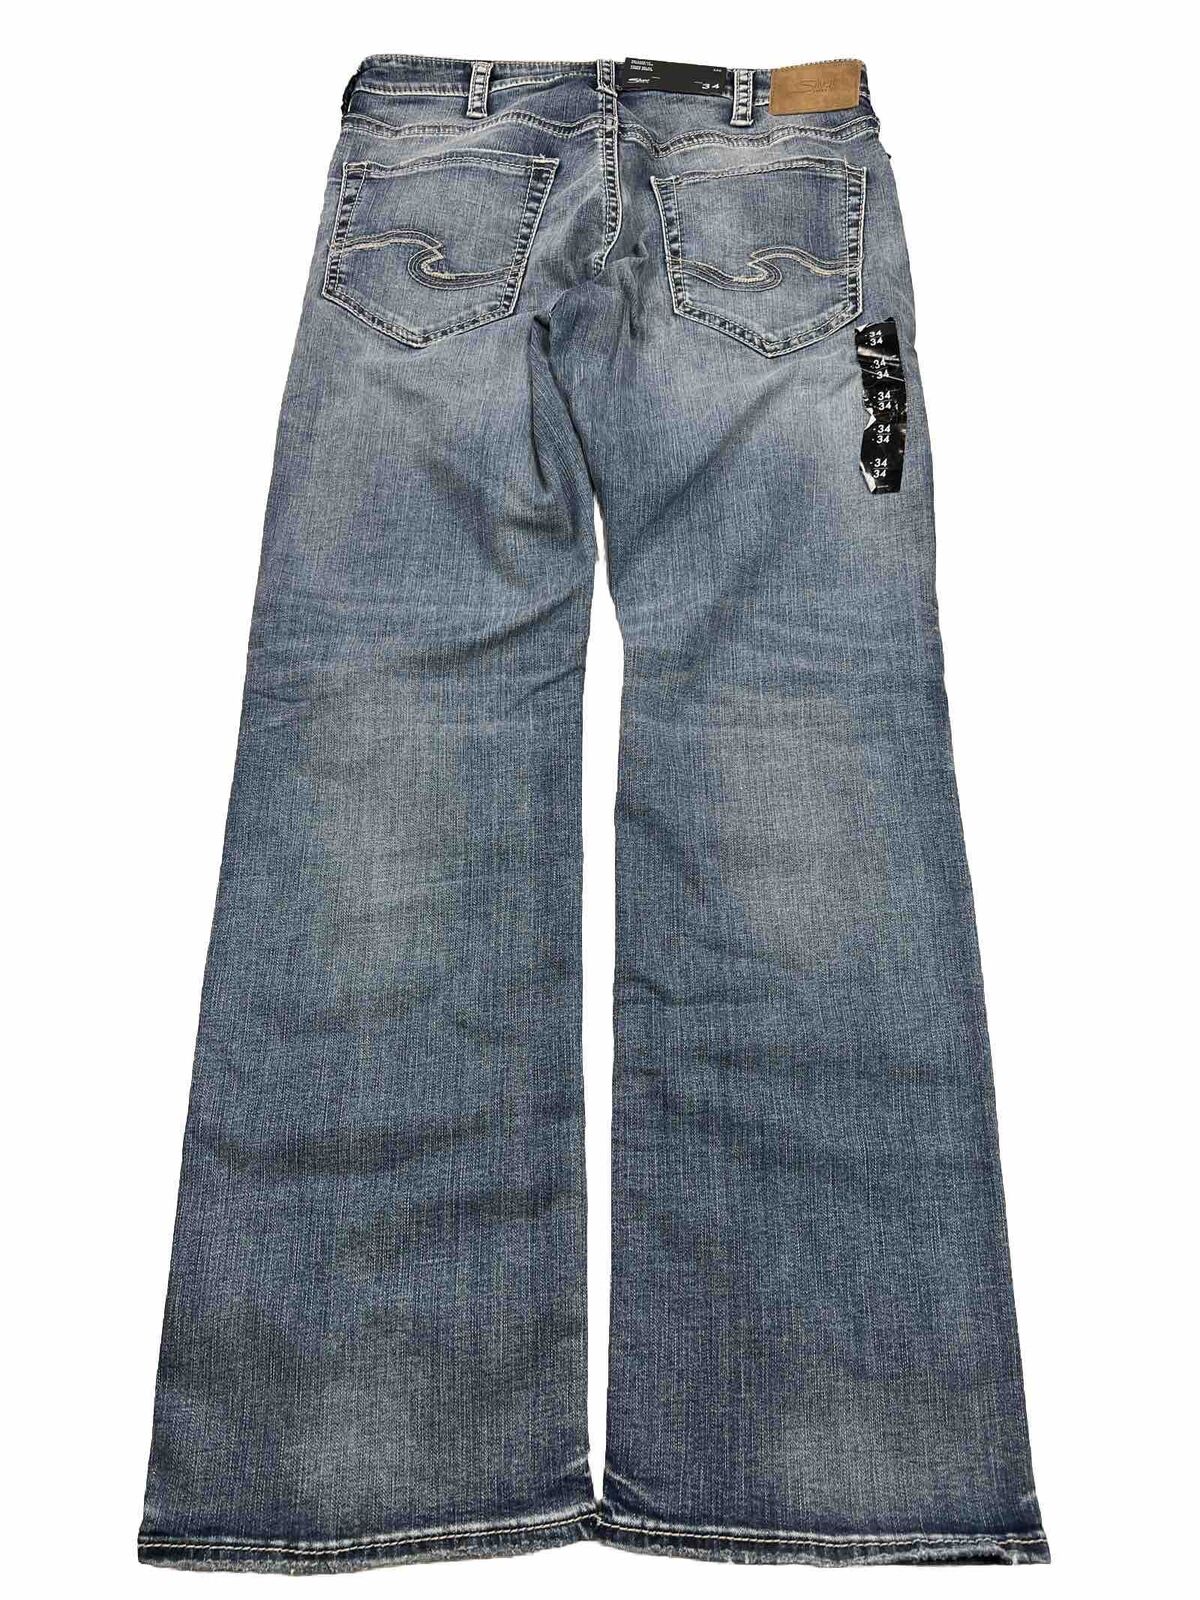 NEW Silver Jeans Men's Light Wash Zac Relaxed Straight Jeans - 34